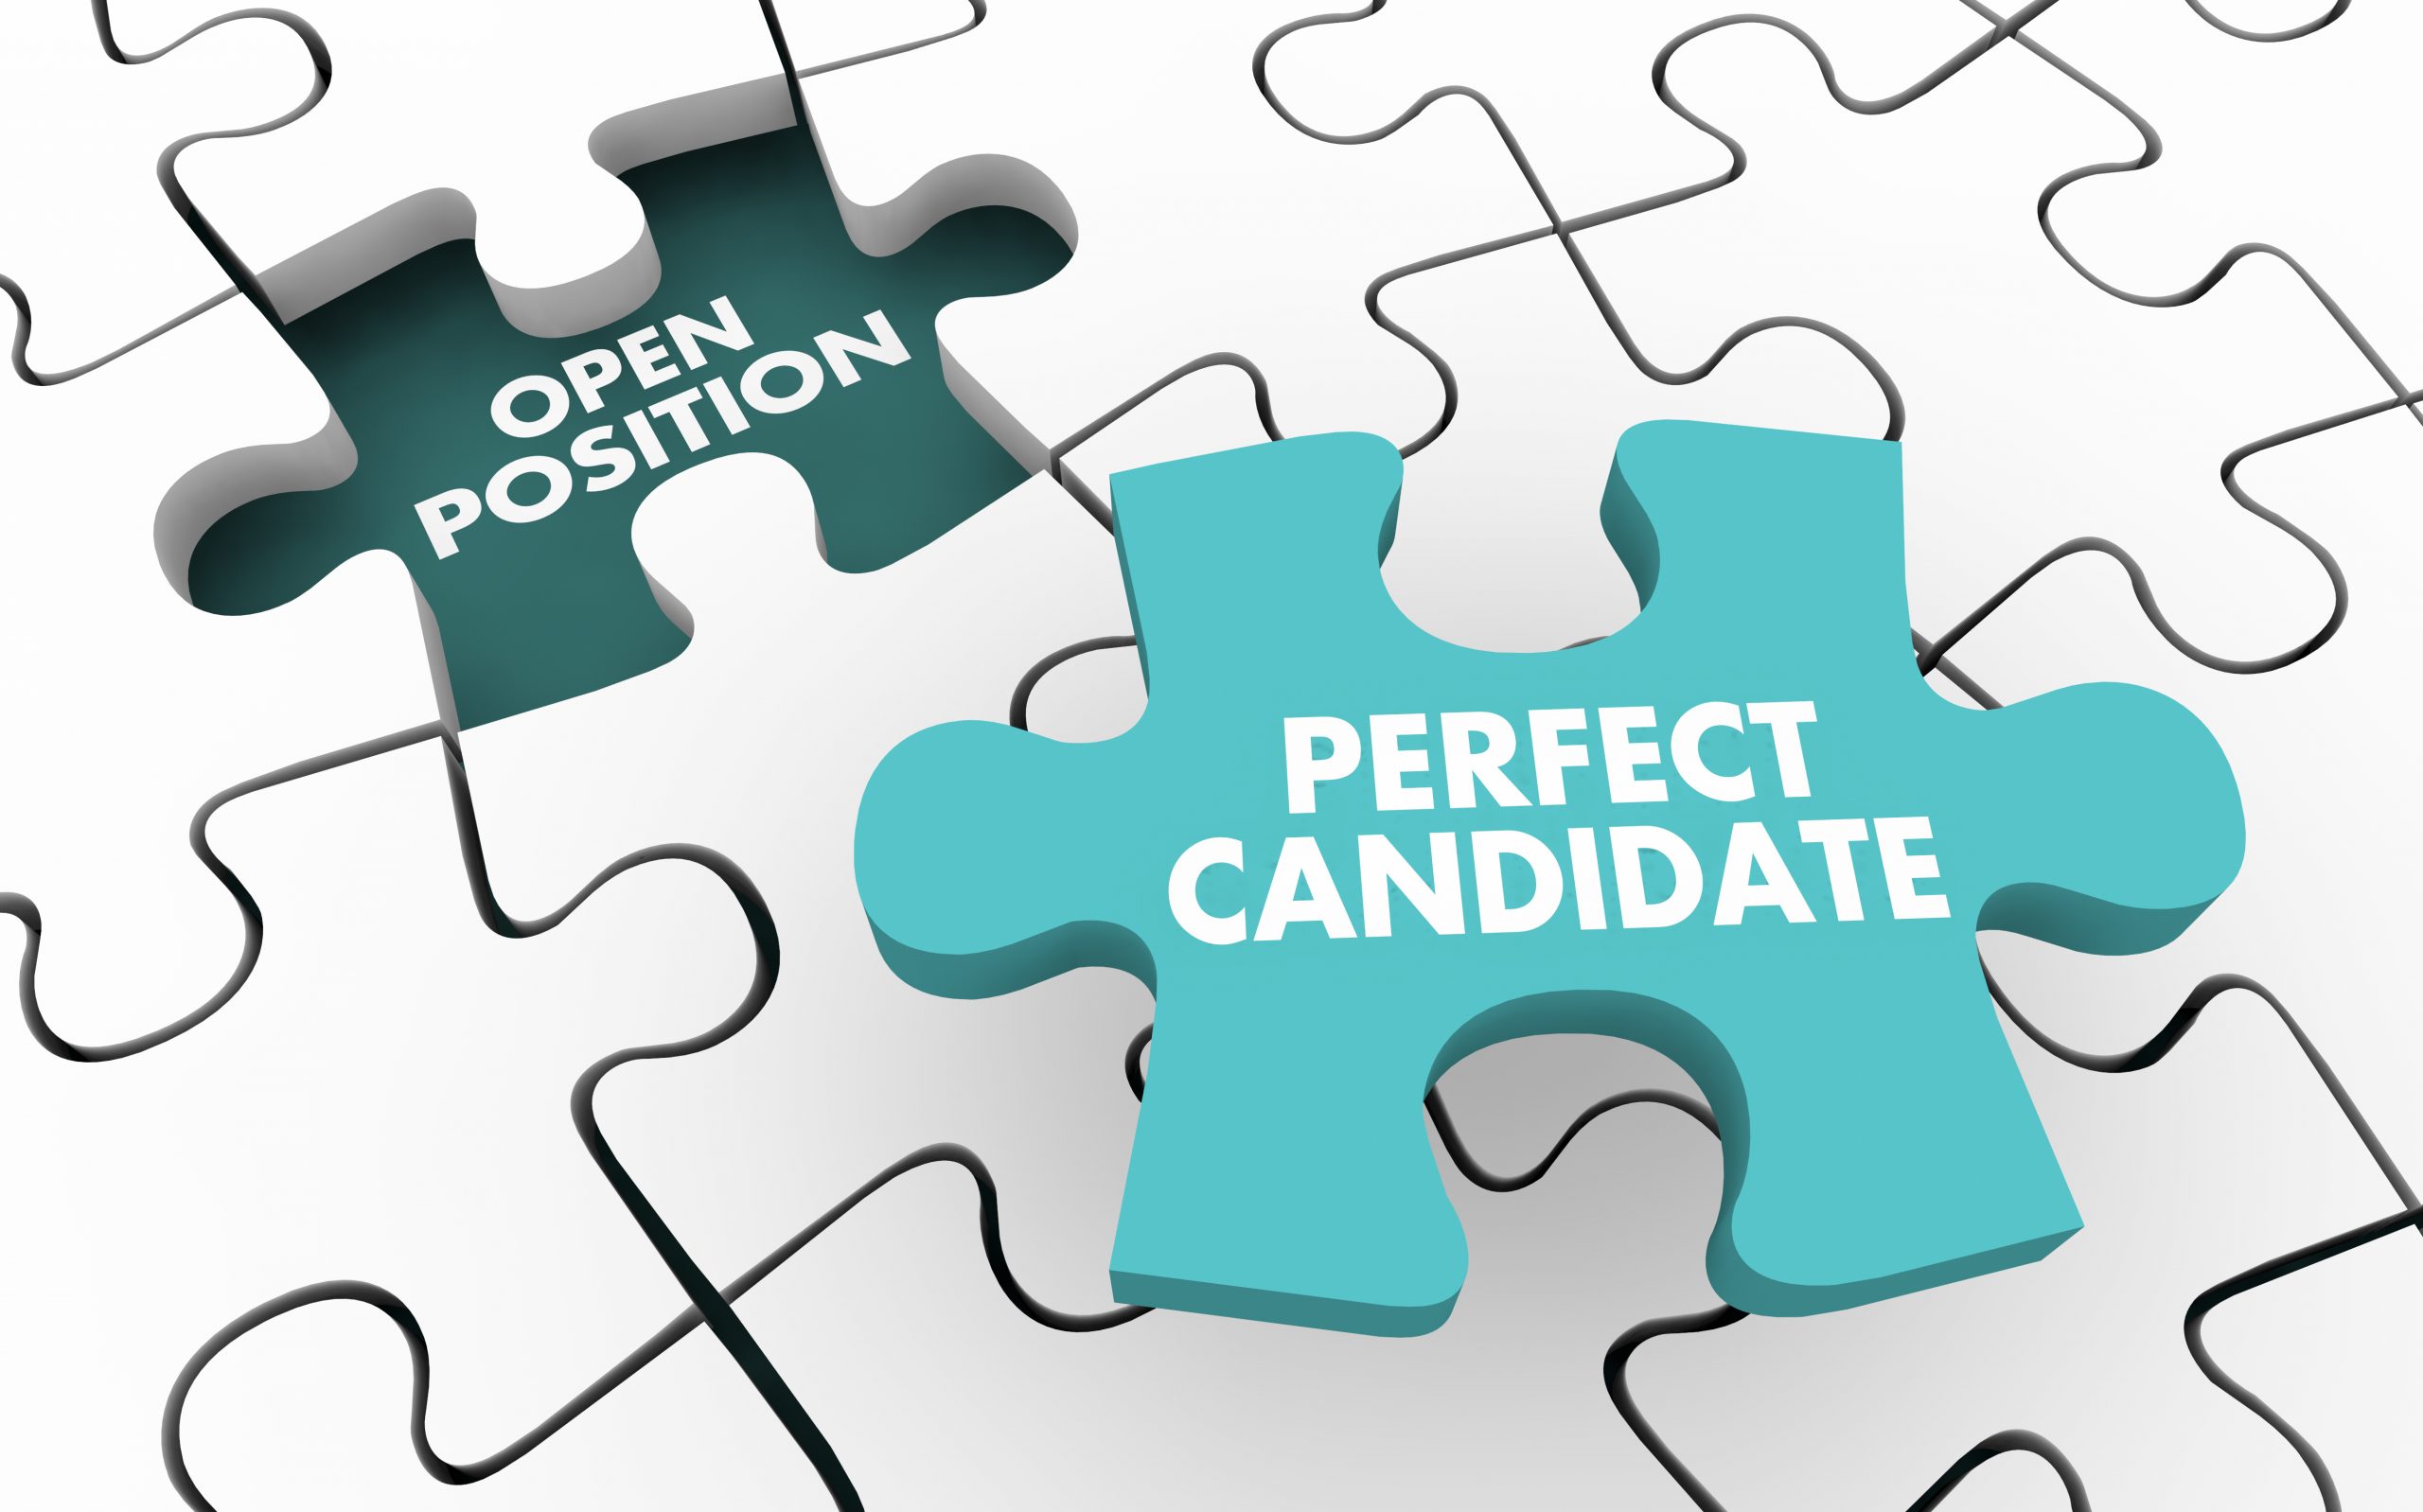 what is the perfect candidate?